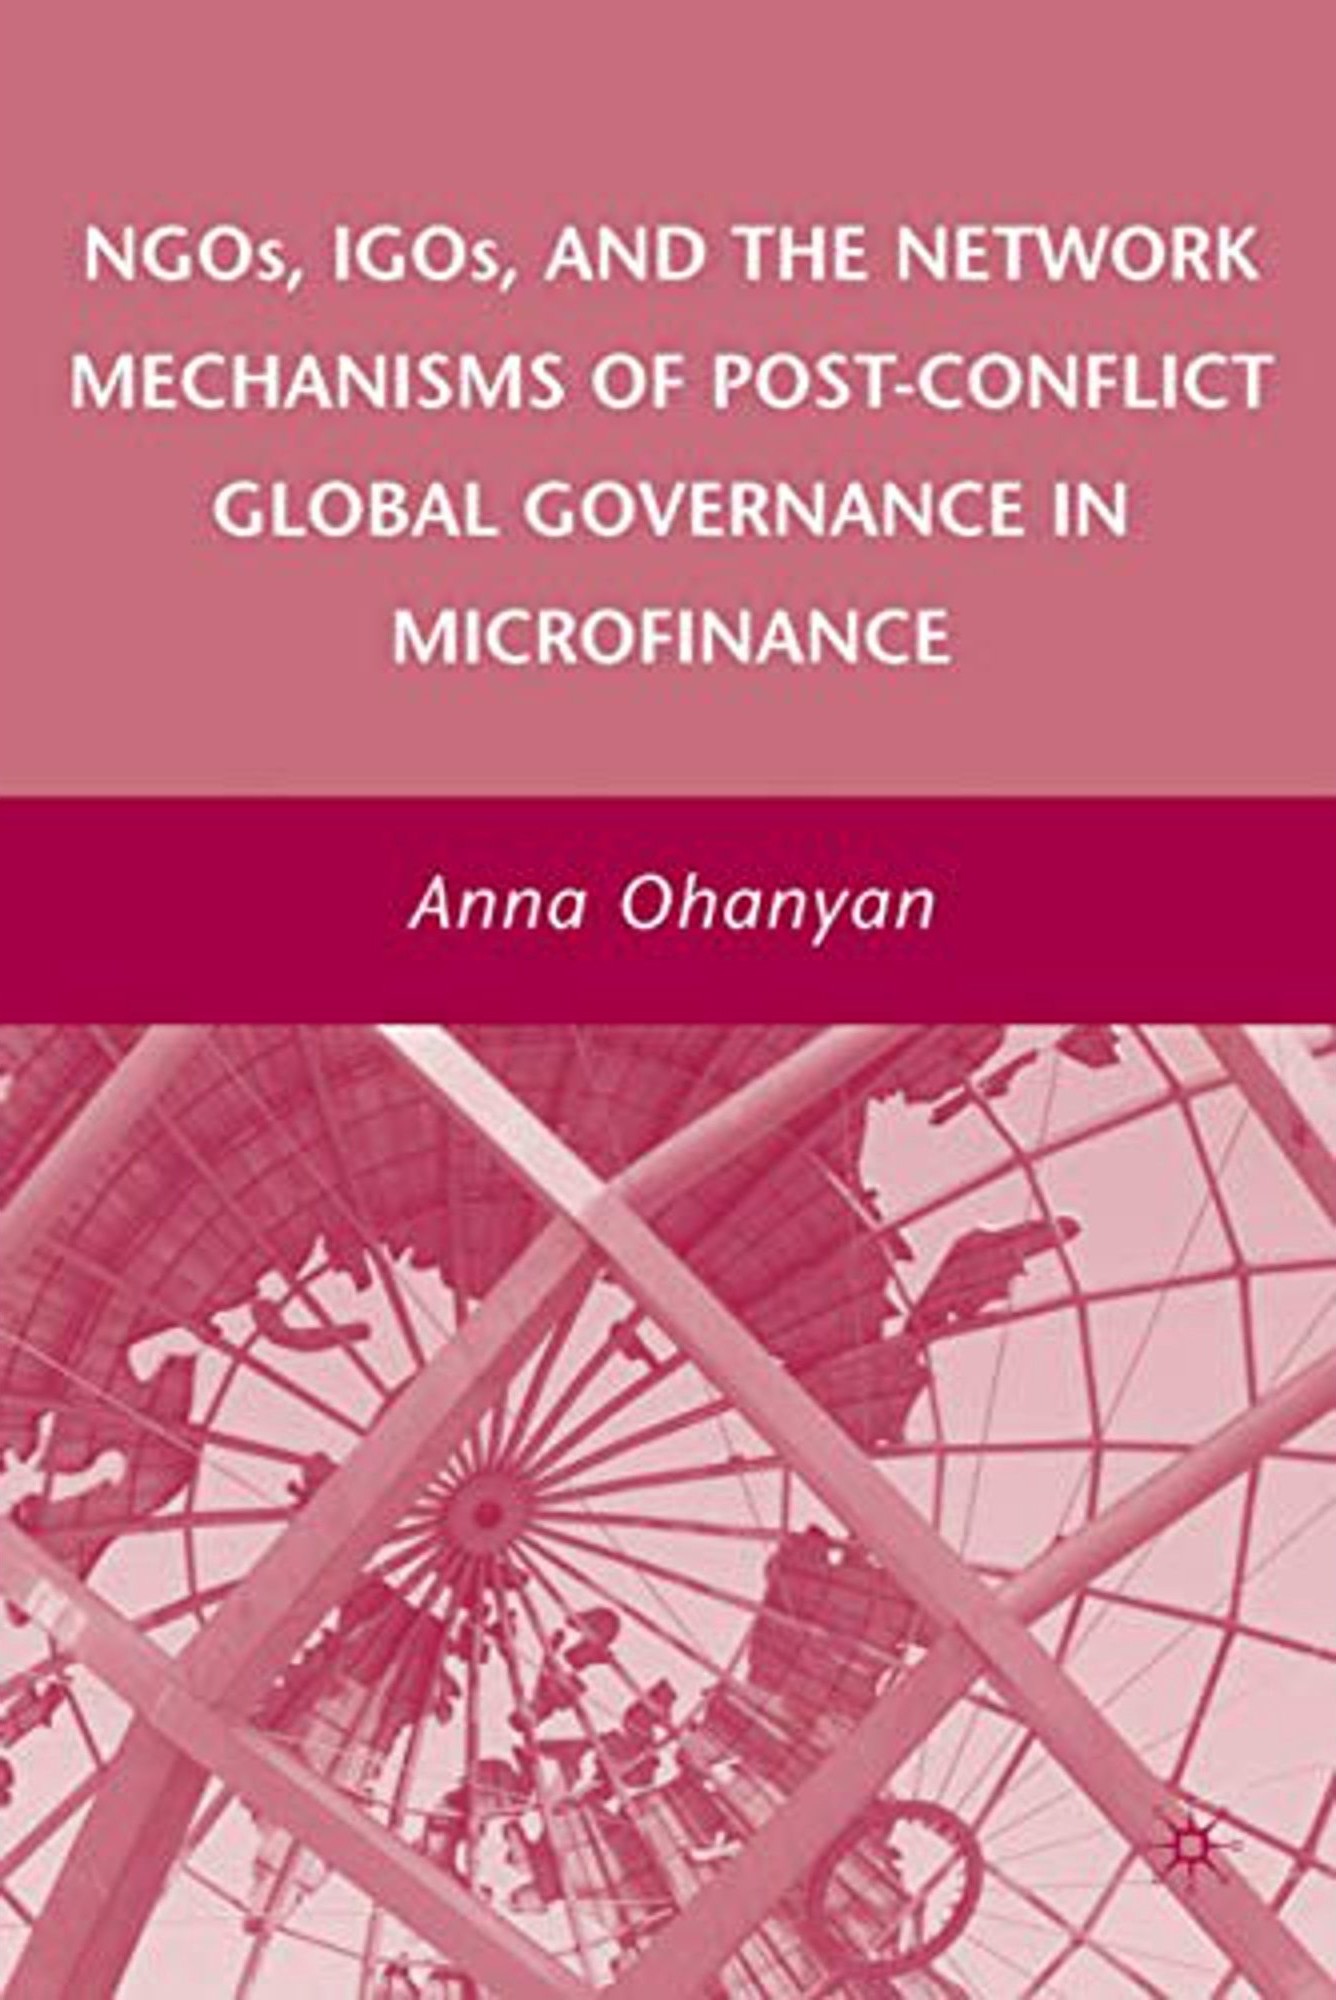 NGOs, IGOs, and the Network Mechanisms of Post-Conflict Global Governance in Microfinance